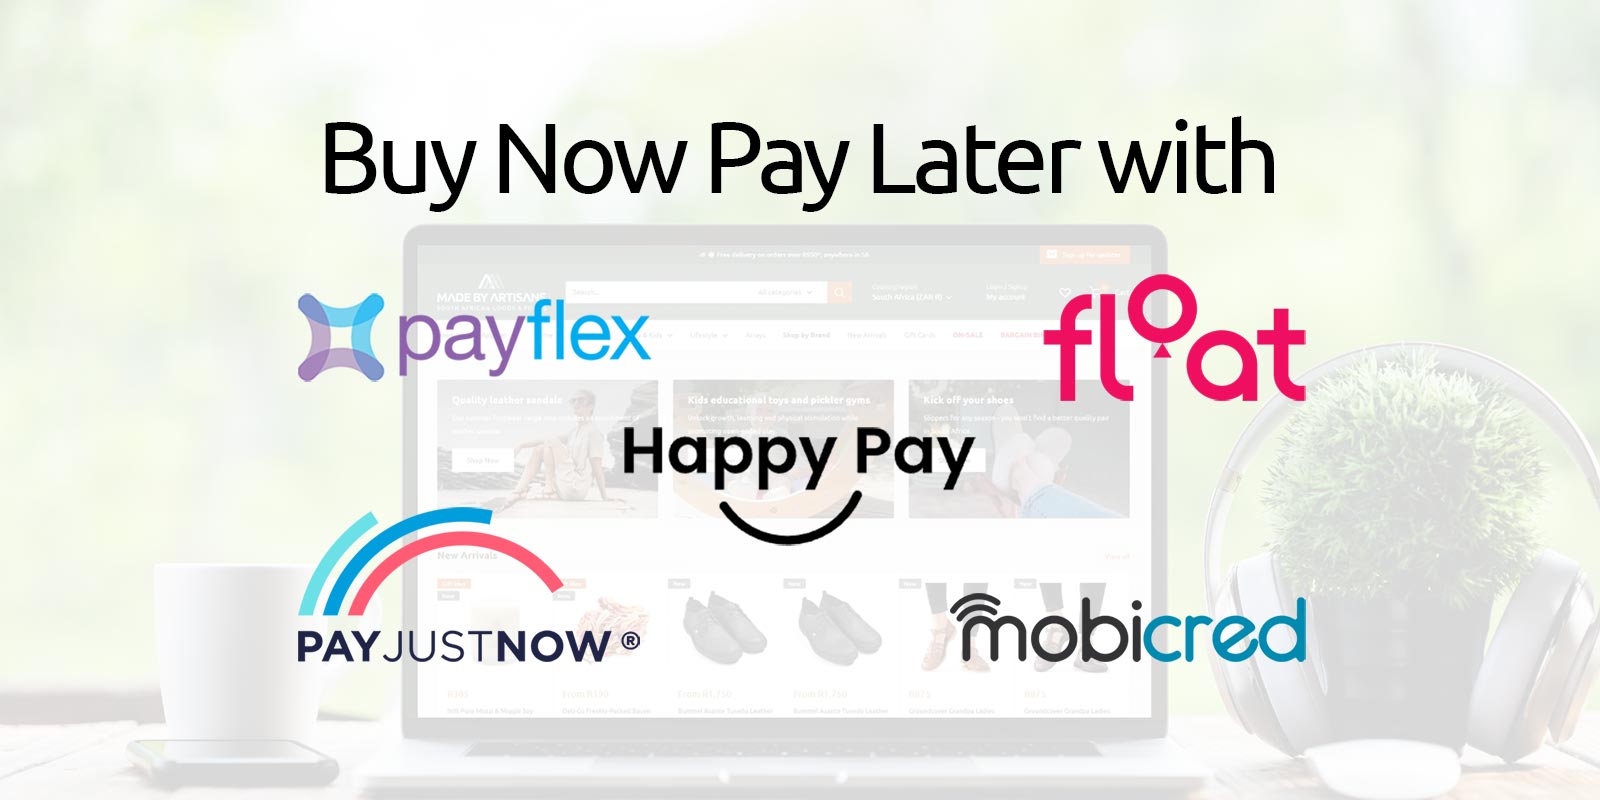 Buy Now Pay Later with Payflex, PayJustNow, Float, Mobicred or Happy Pay